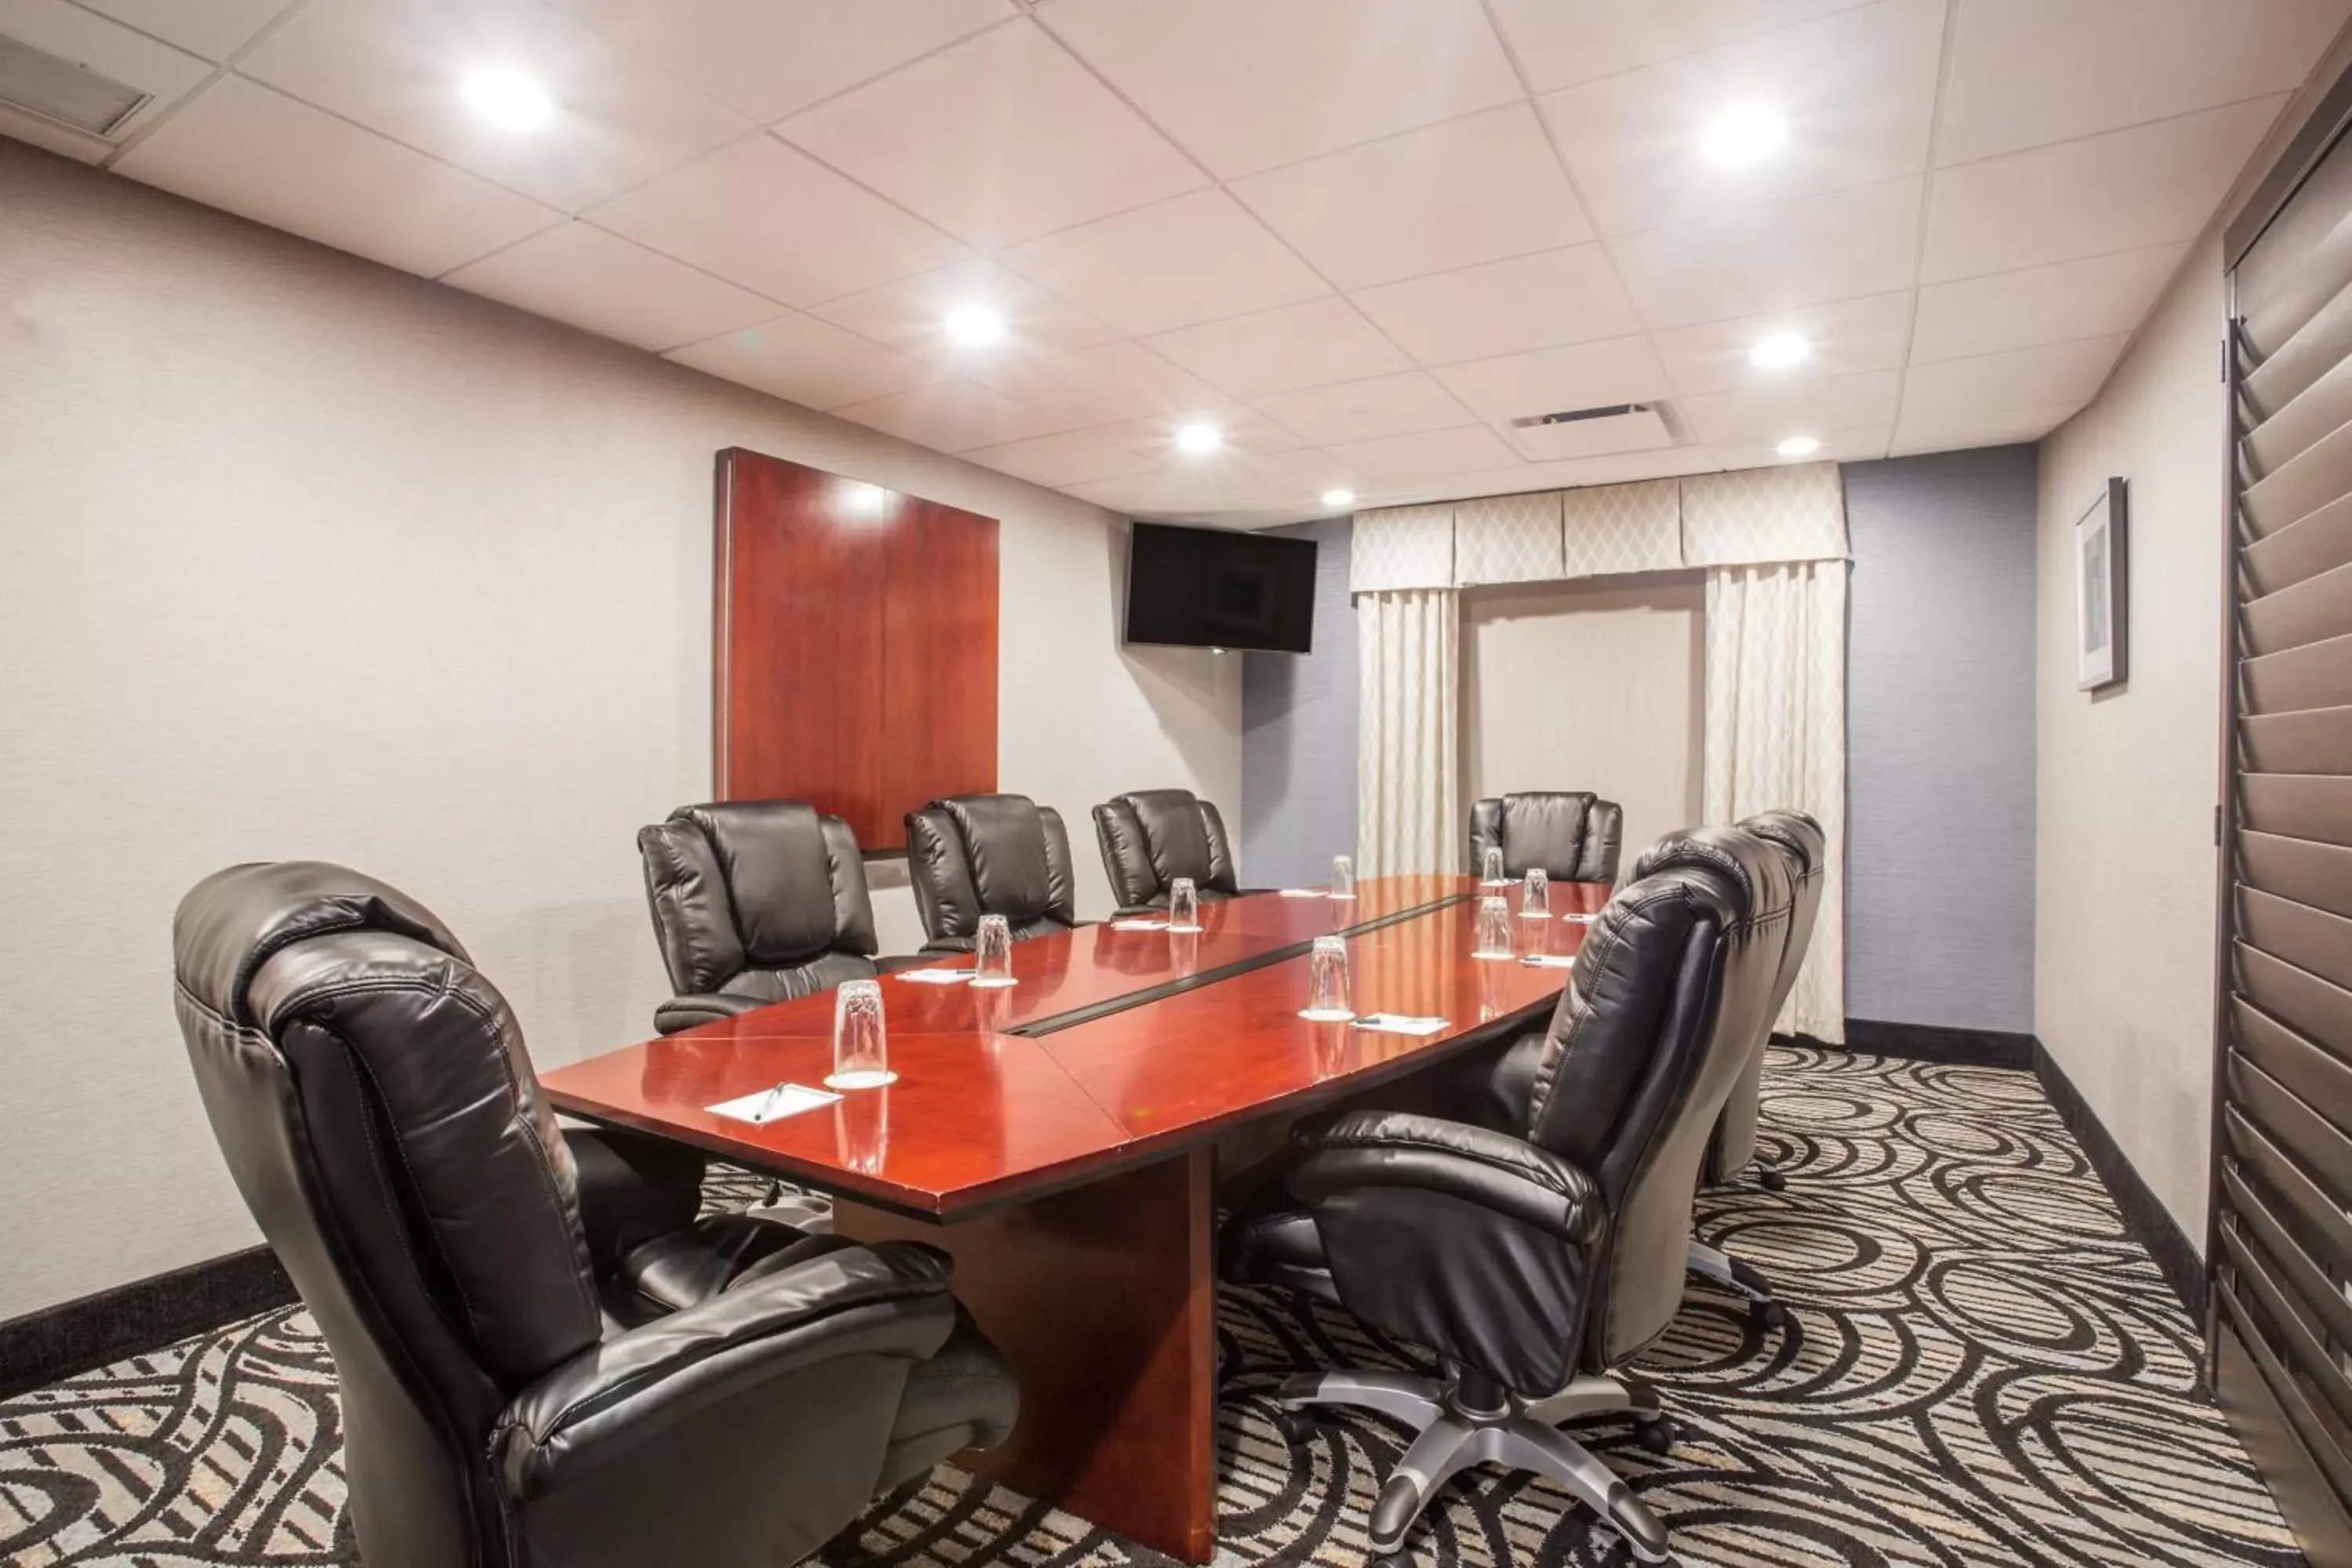 Meeting/conference room in Wingate by Wyndham - Universal Studios and Convention Center